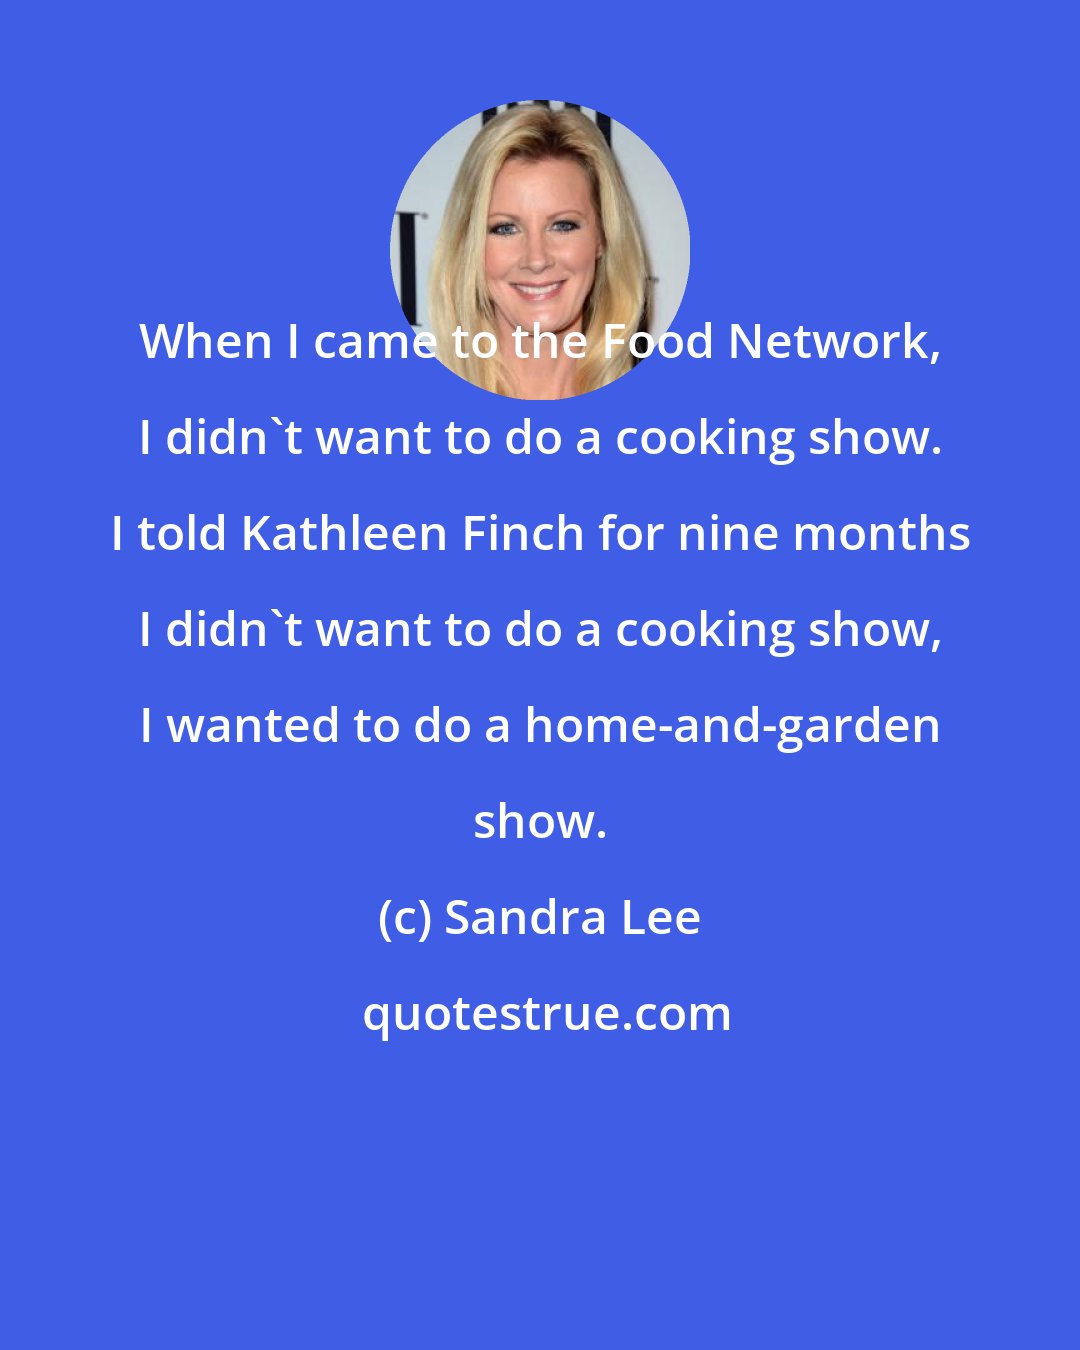 Sandra Lee: When I came to the Food Network, I didn't want to do a cooking show. I told Kathleen Finch for nine months I didn't want to do a cooking show, I wanted to do a home-and-garden show.